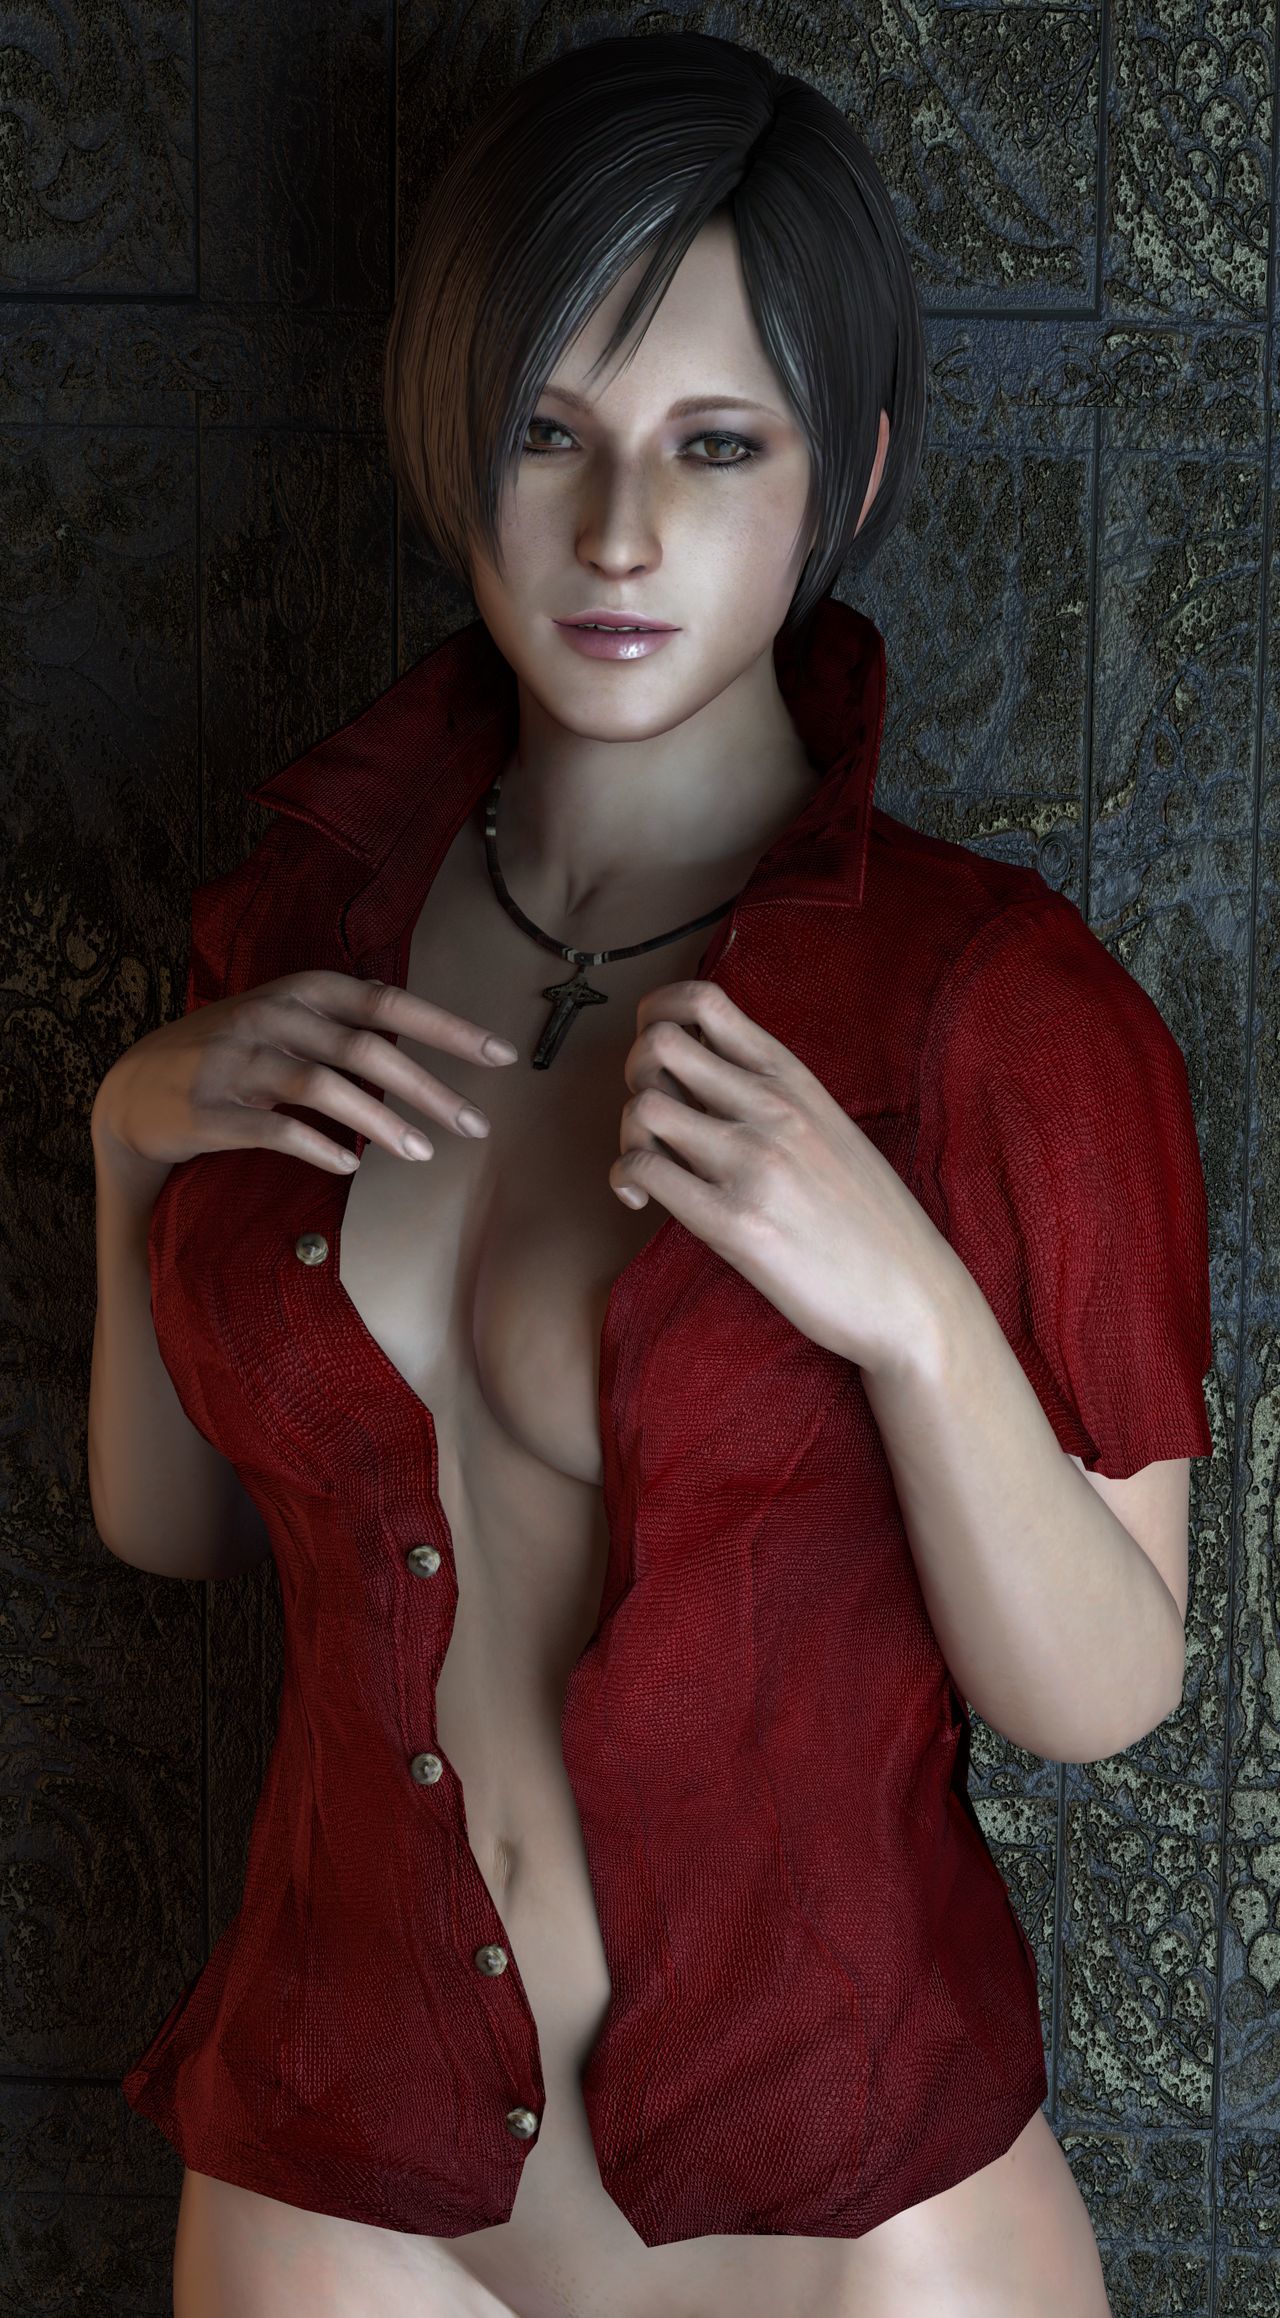 Claire redfield photos